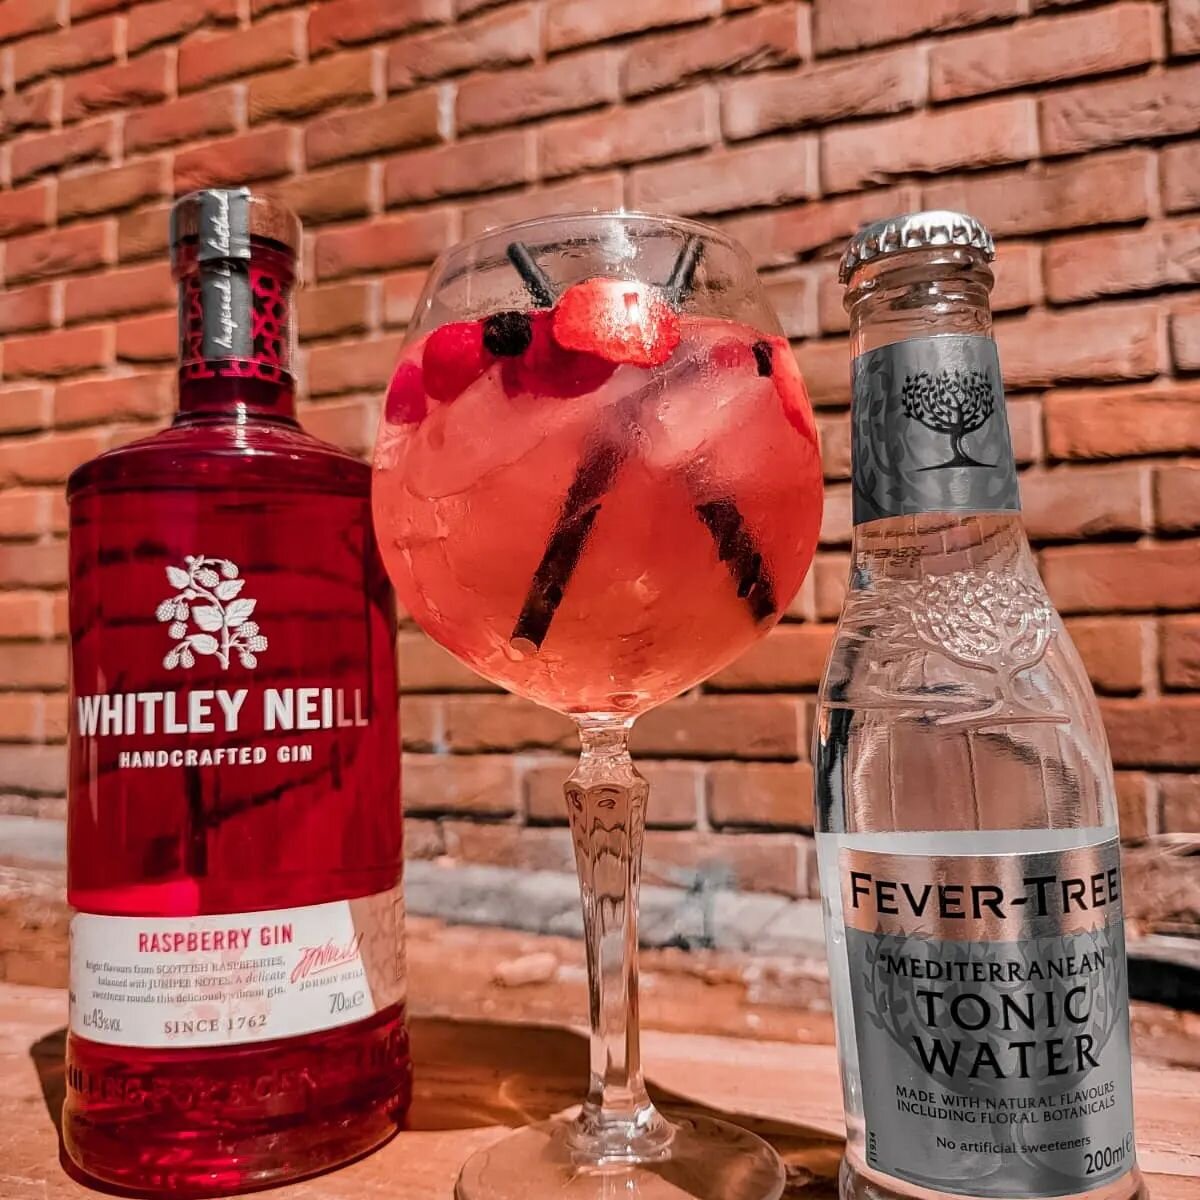 Fancy a cheeky drink in the sun? Our fab gin selection has you covered! We stock Whitley Neill gins in: 
&bull;raspberry
&bull;rhubarb &amp; ginger
&bull;parma violet
&bull;blood orange
&bull;original dry 

Available with a range of Fever-Tree tonics